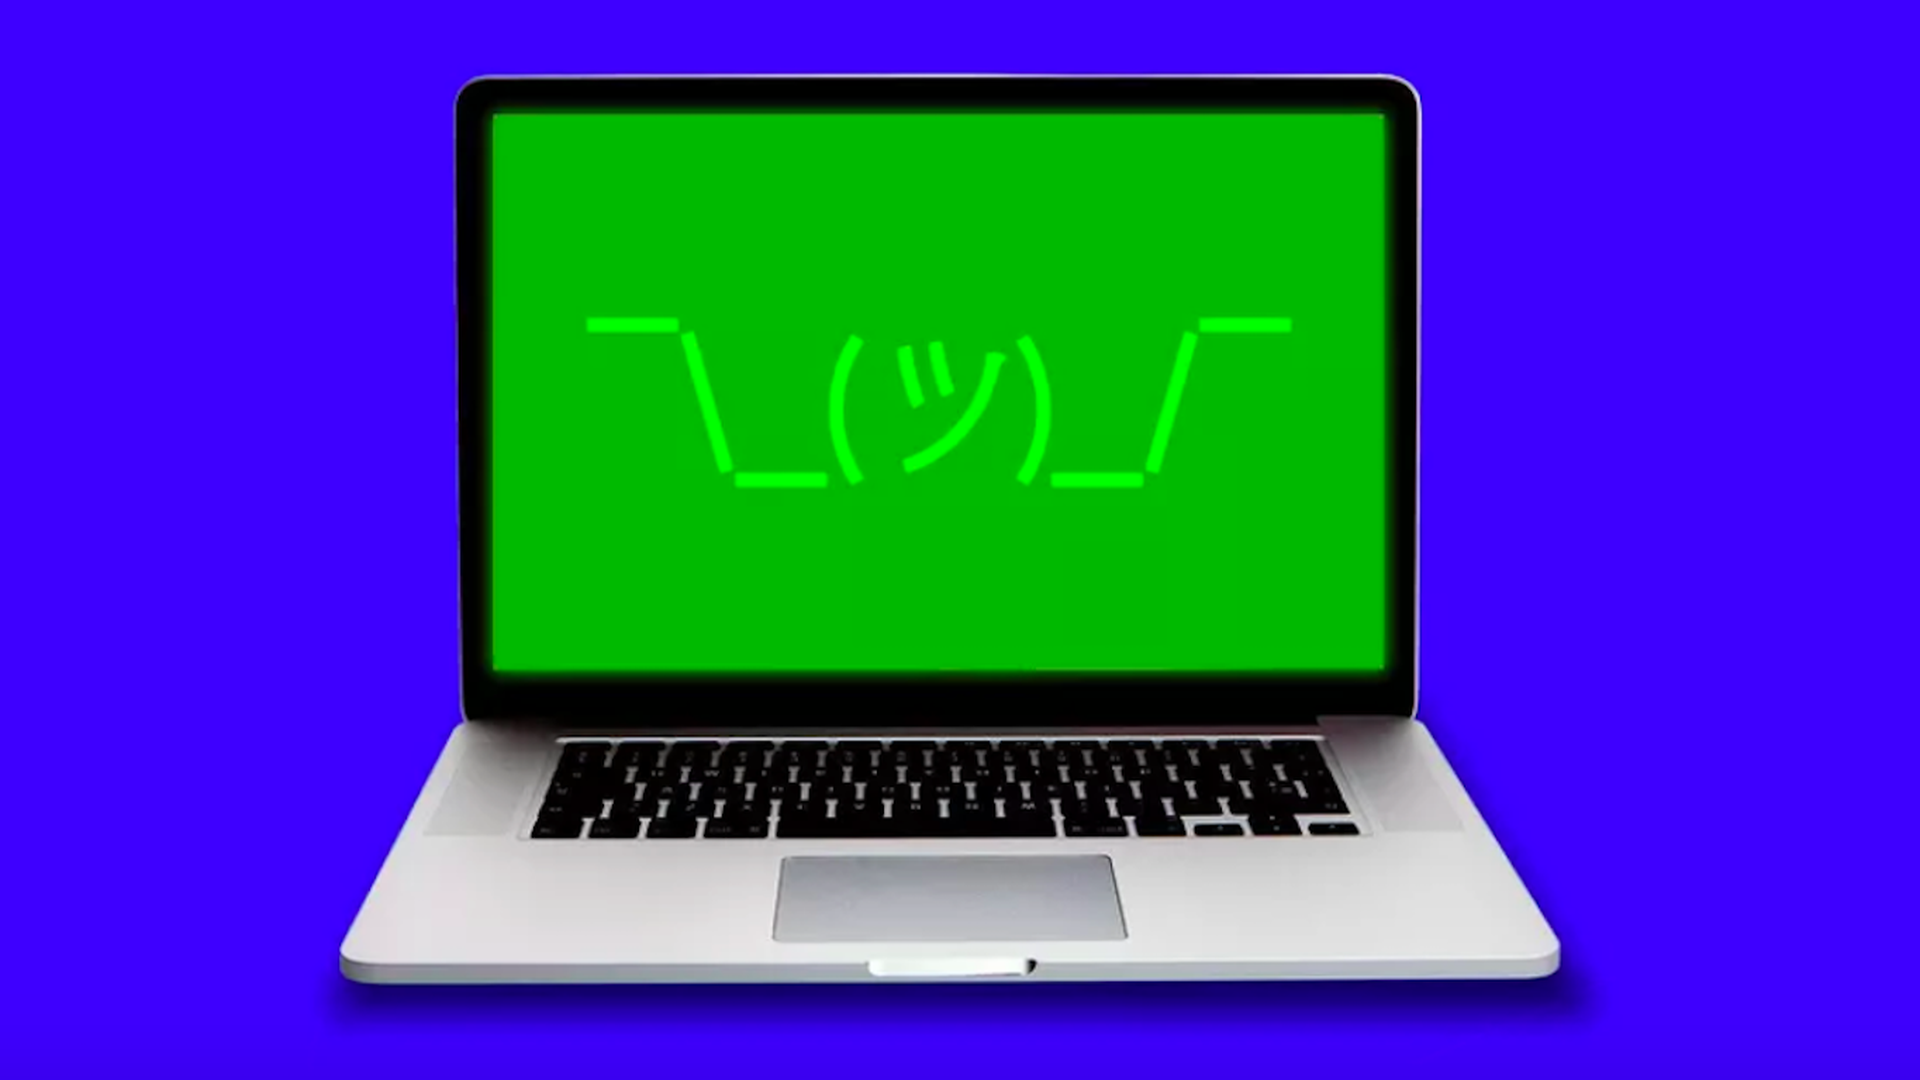 A laptop with a shrugging emoji on the screen